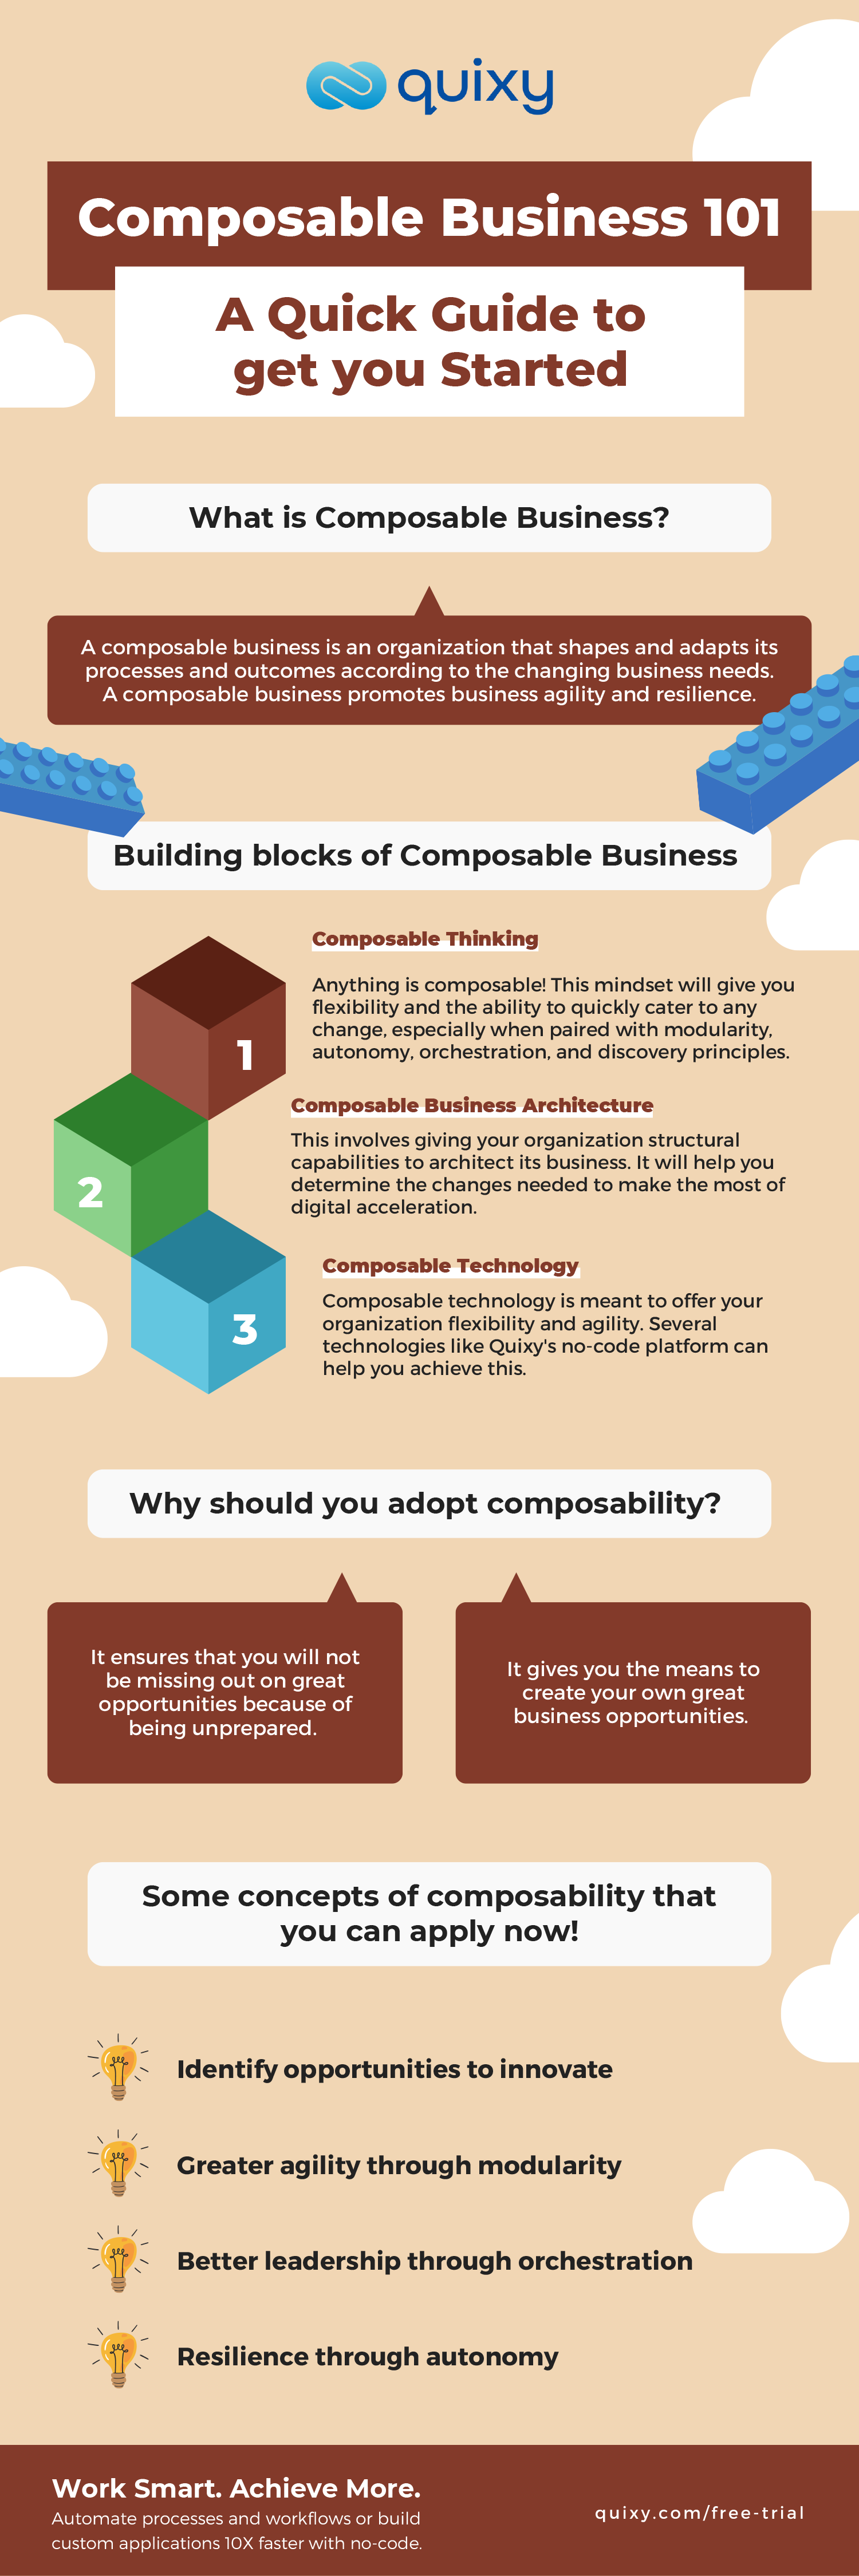 Composable Business Infographic